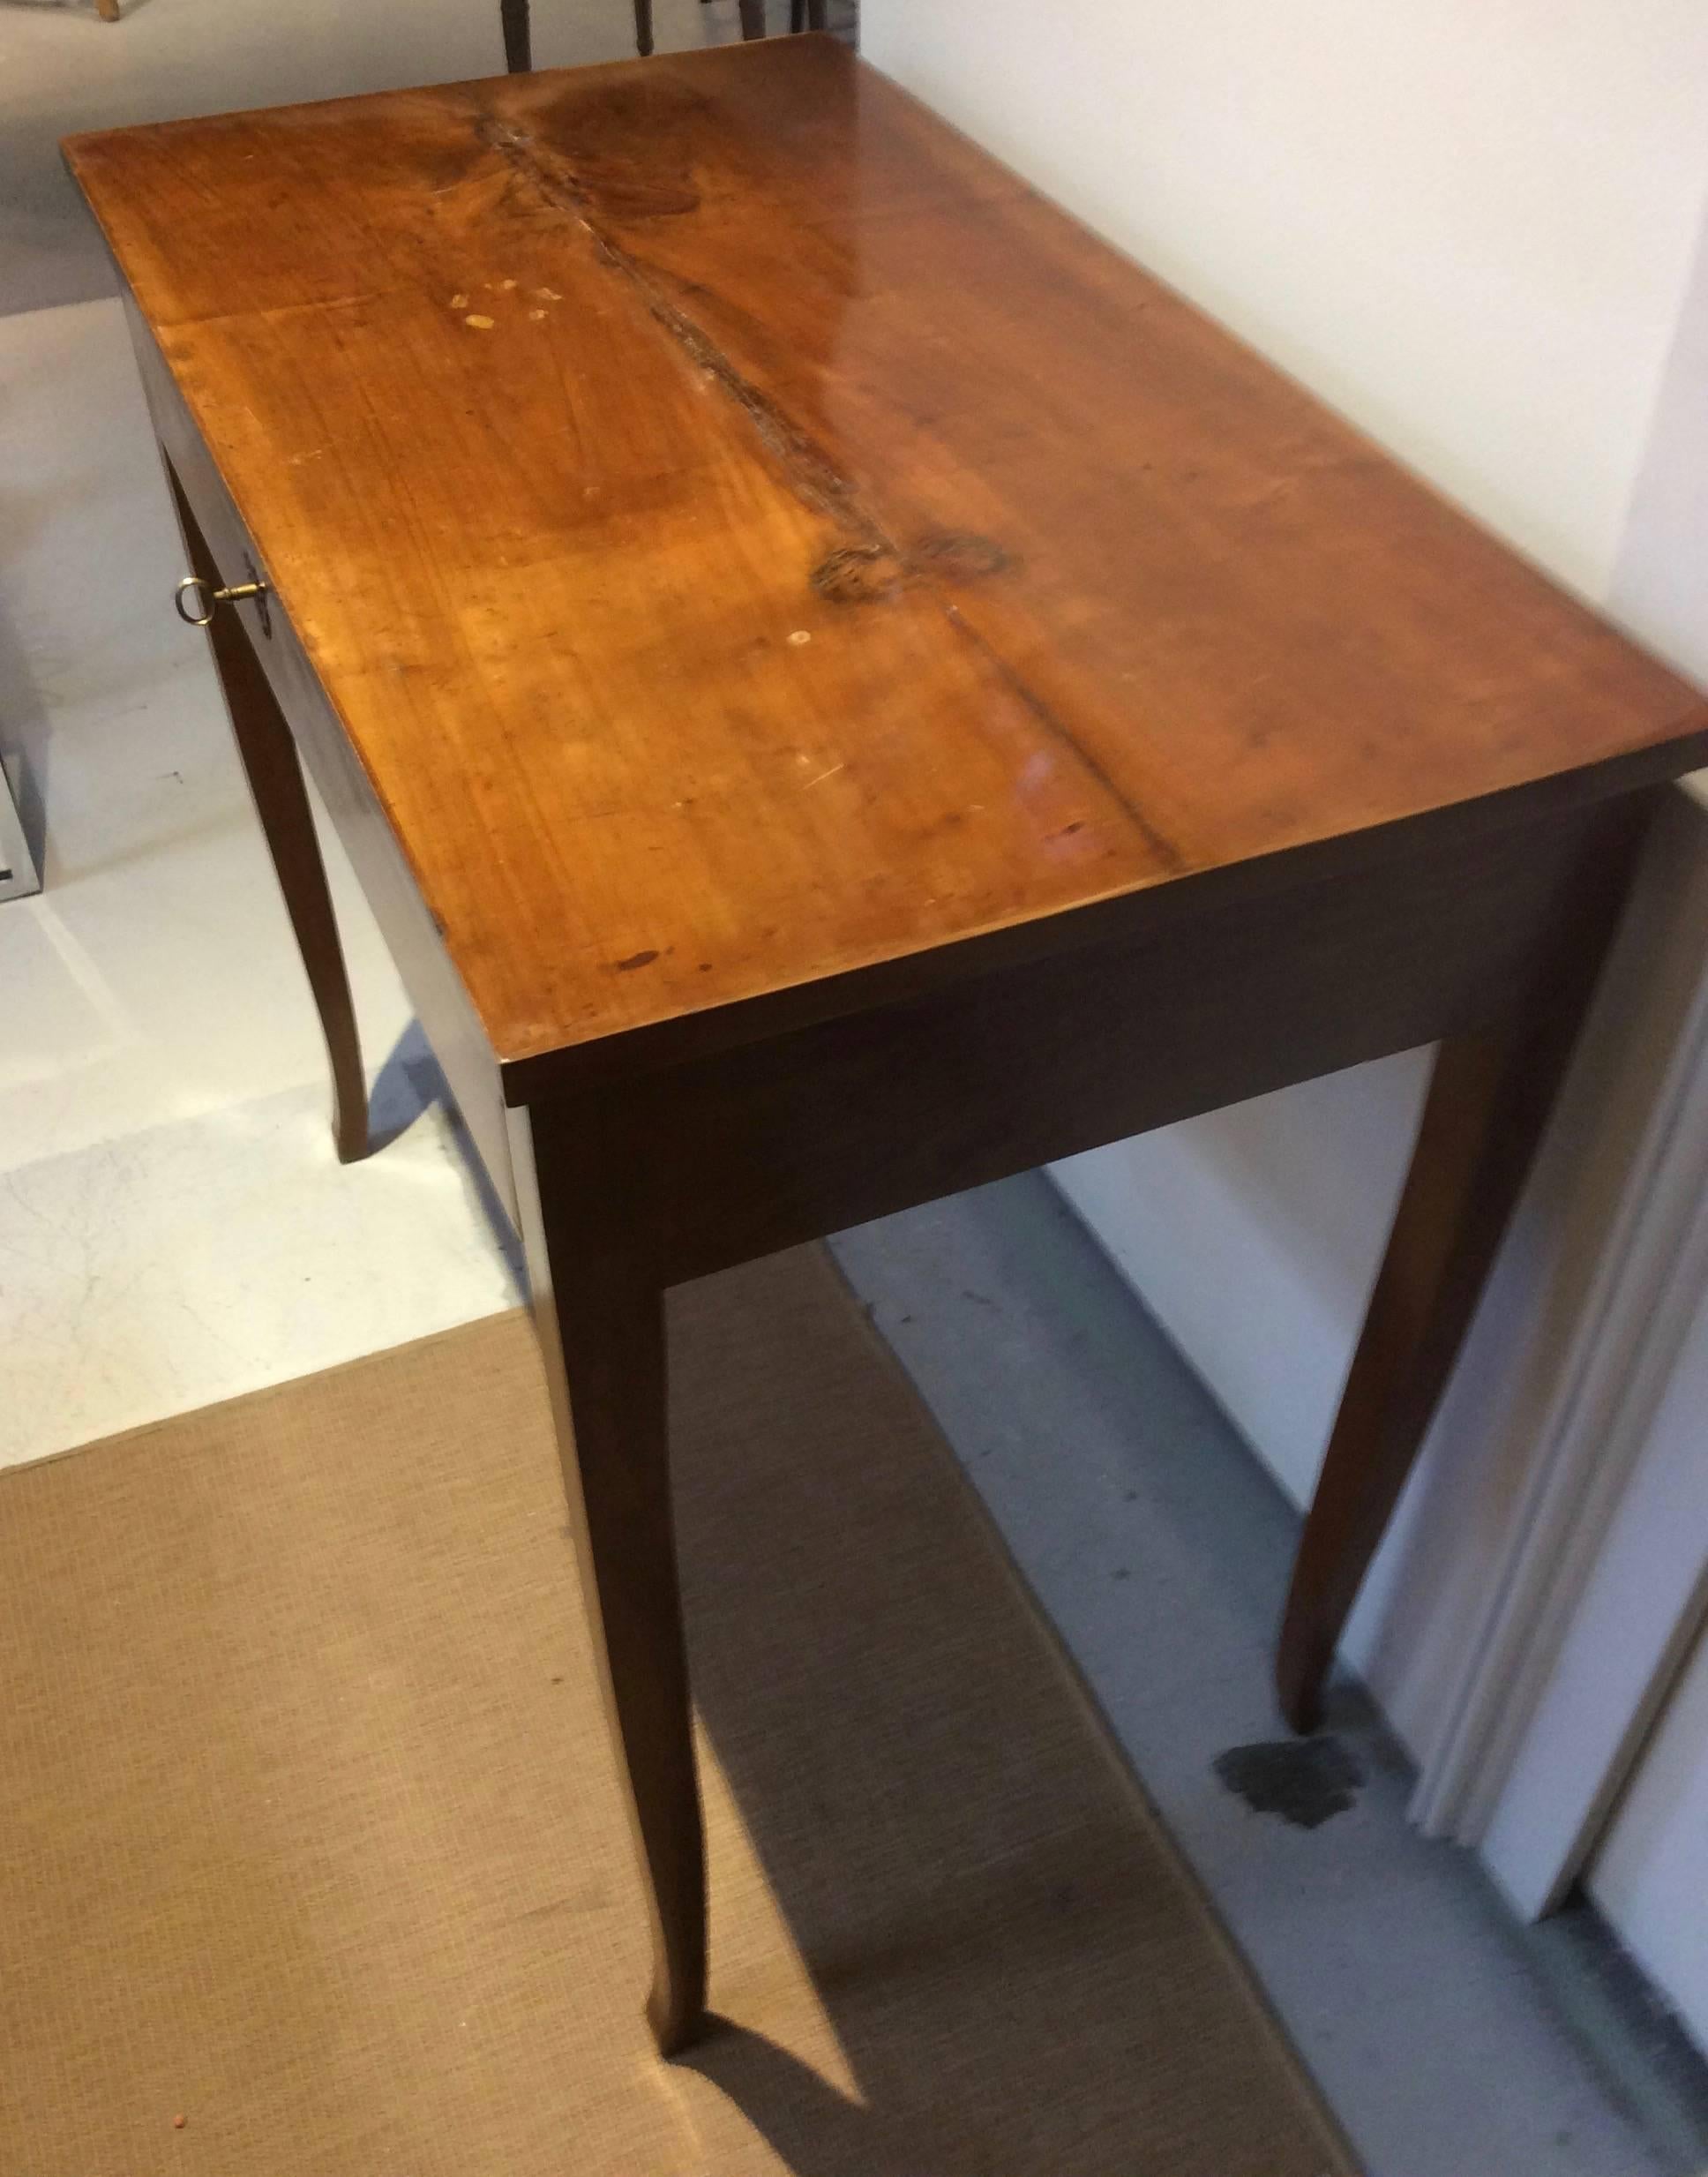 Wood Antique Writing Desk or Table with Lock and Key